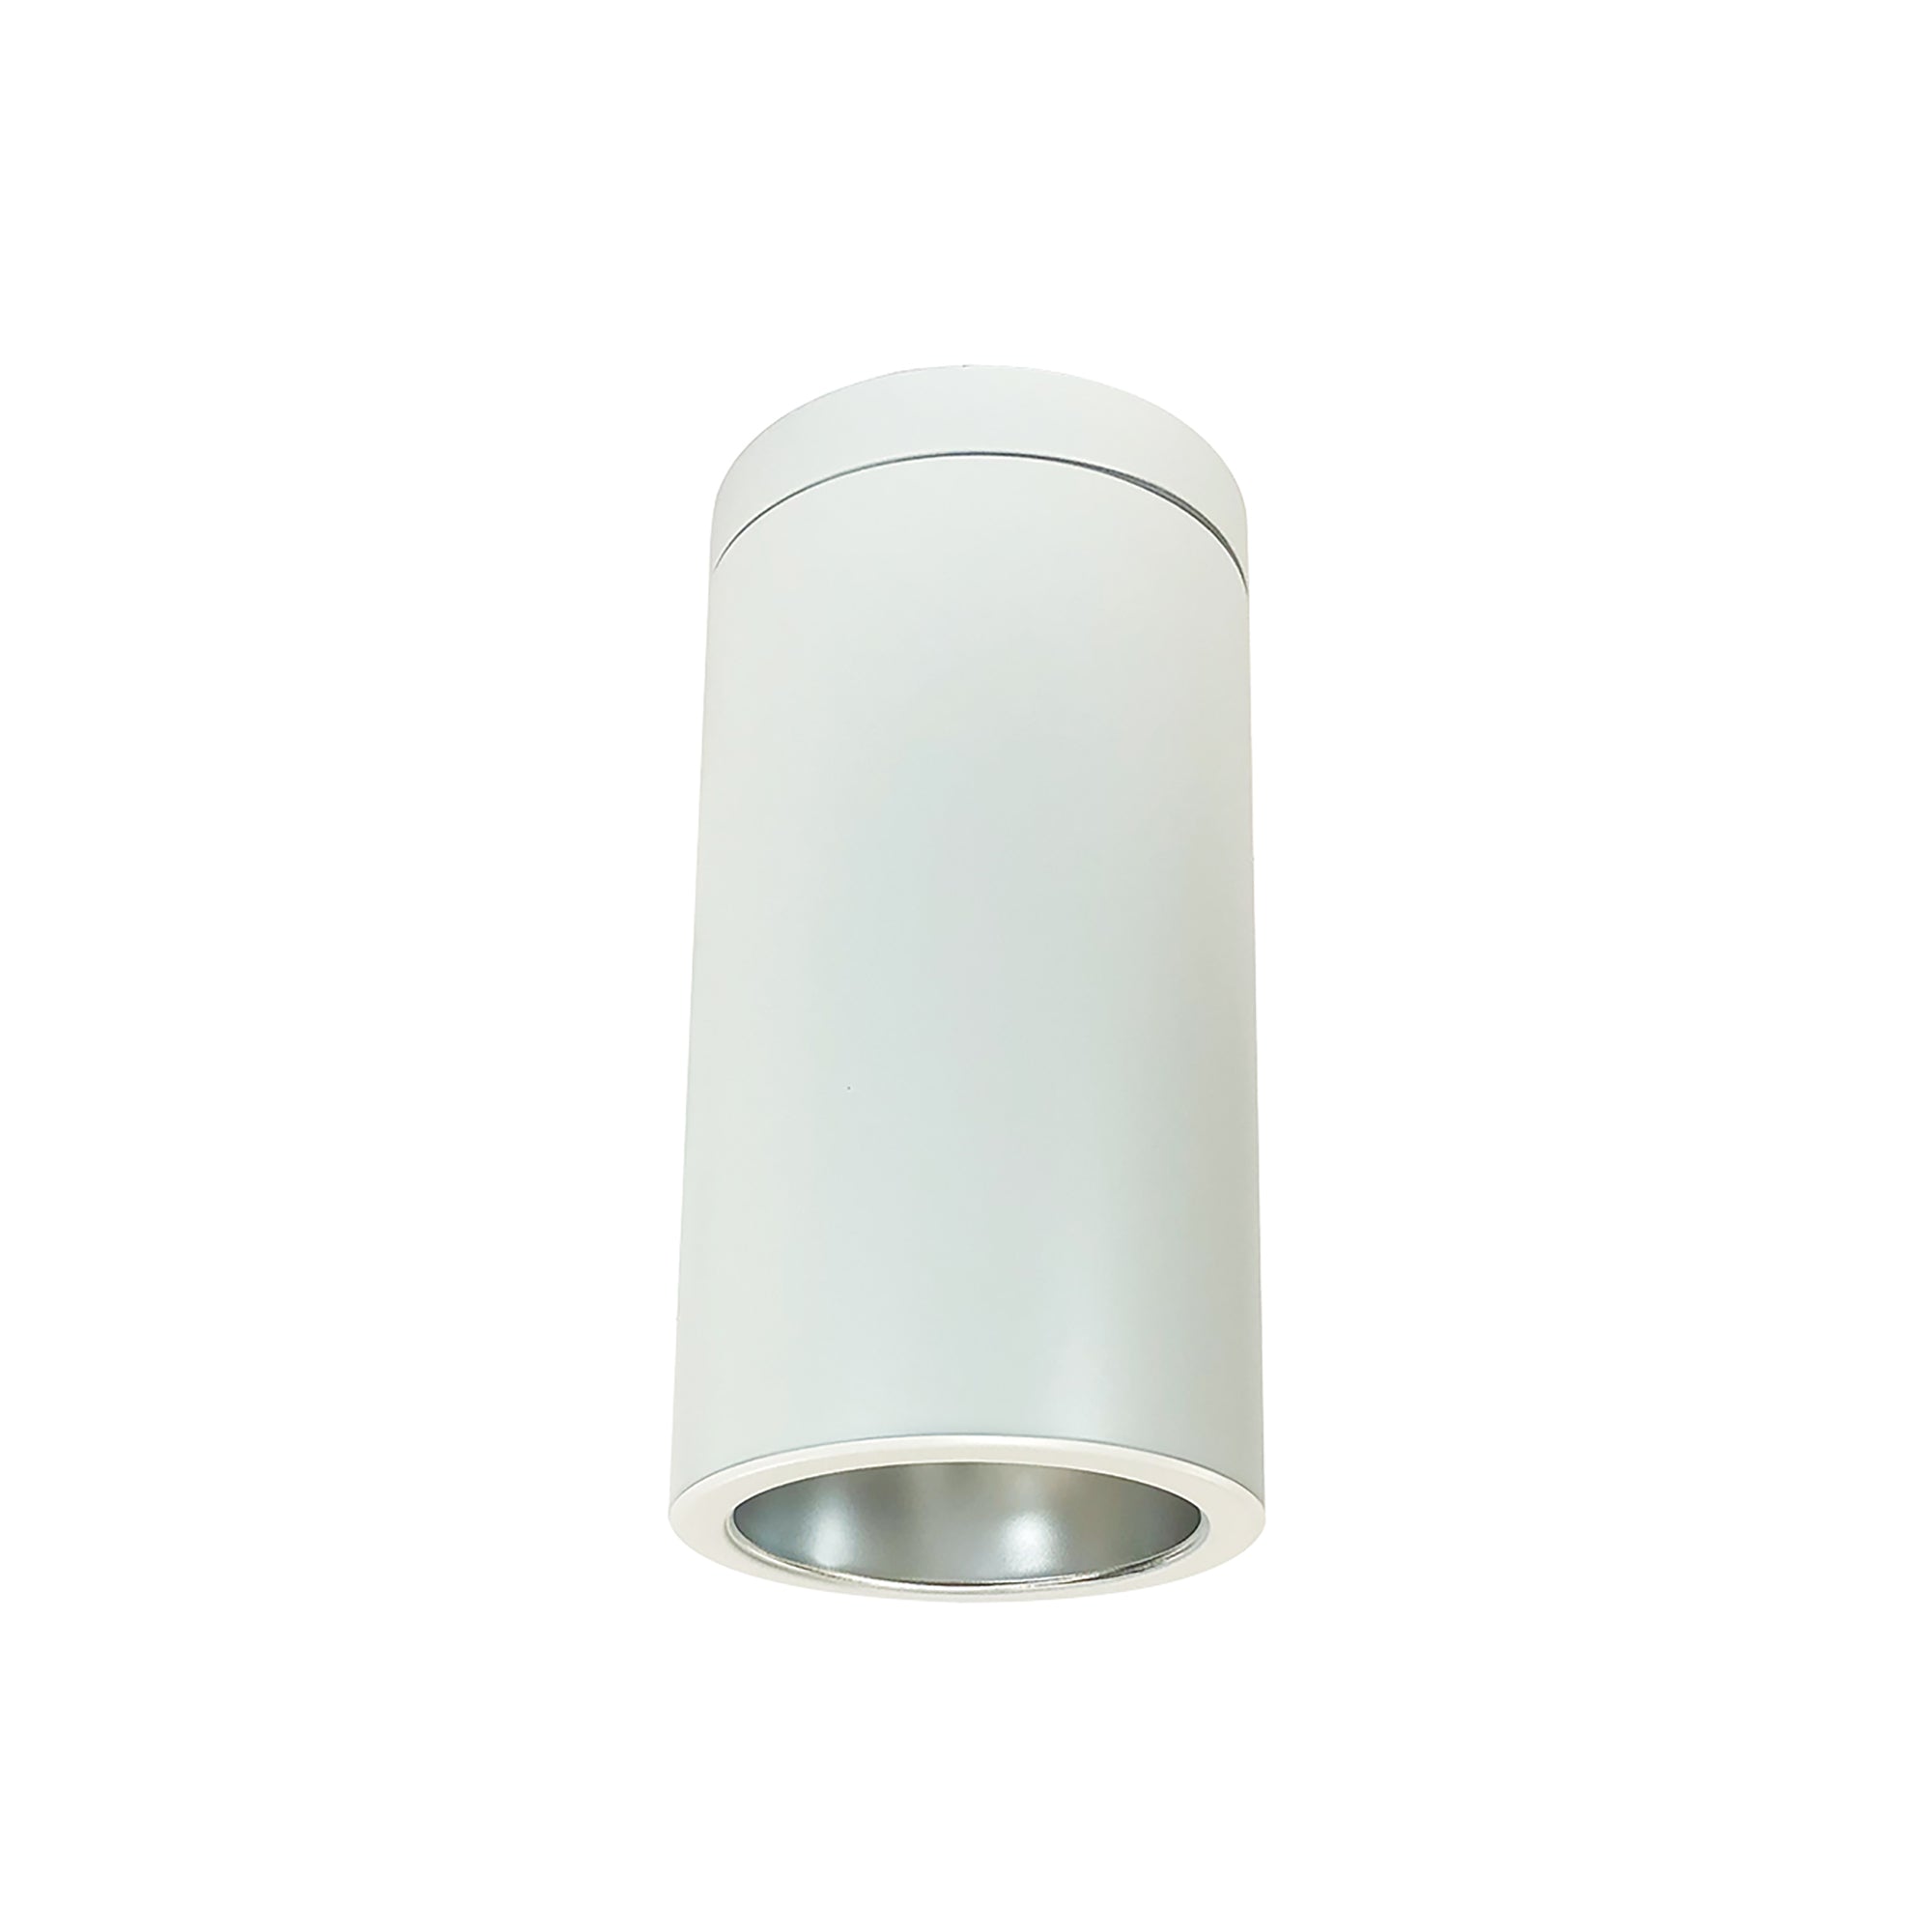 Nora Lighting NYLS2-6S35130FDWW6 - Cylinder - 6 Inch CYL SURFACE 3500LM REF 30K FLOOD DIFF/WHITE WH CYL 120-277V 0-10V